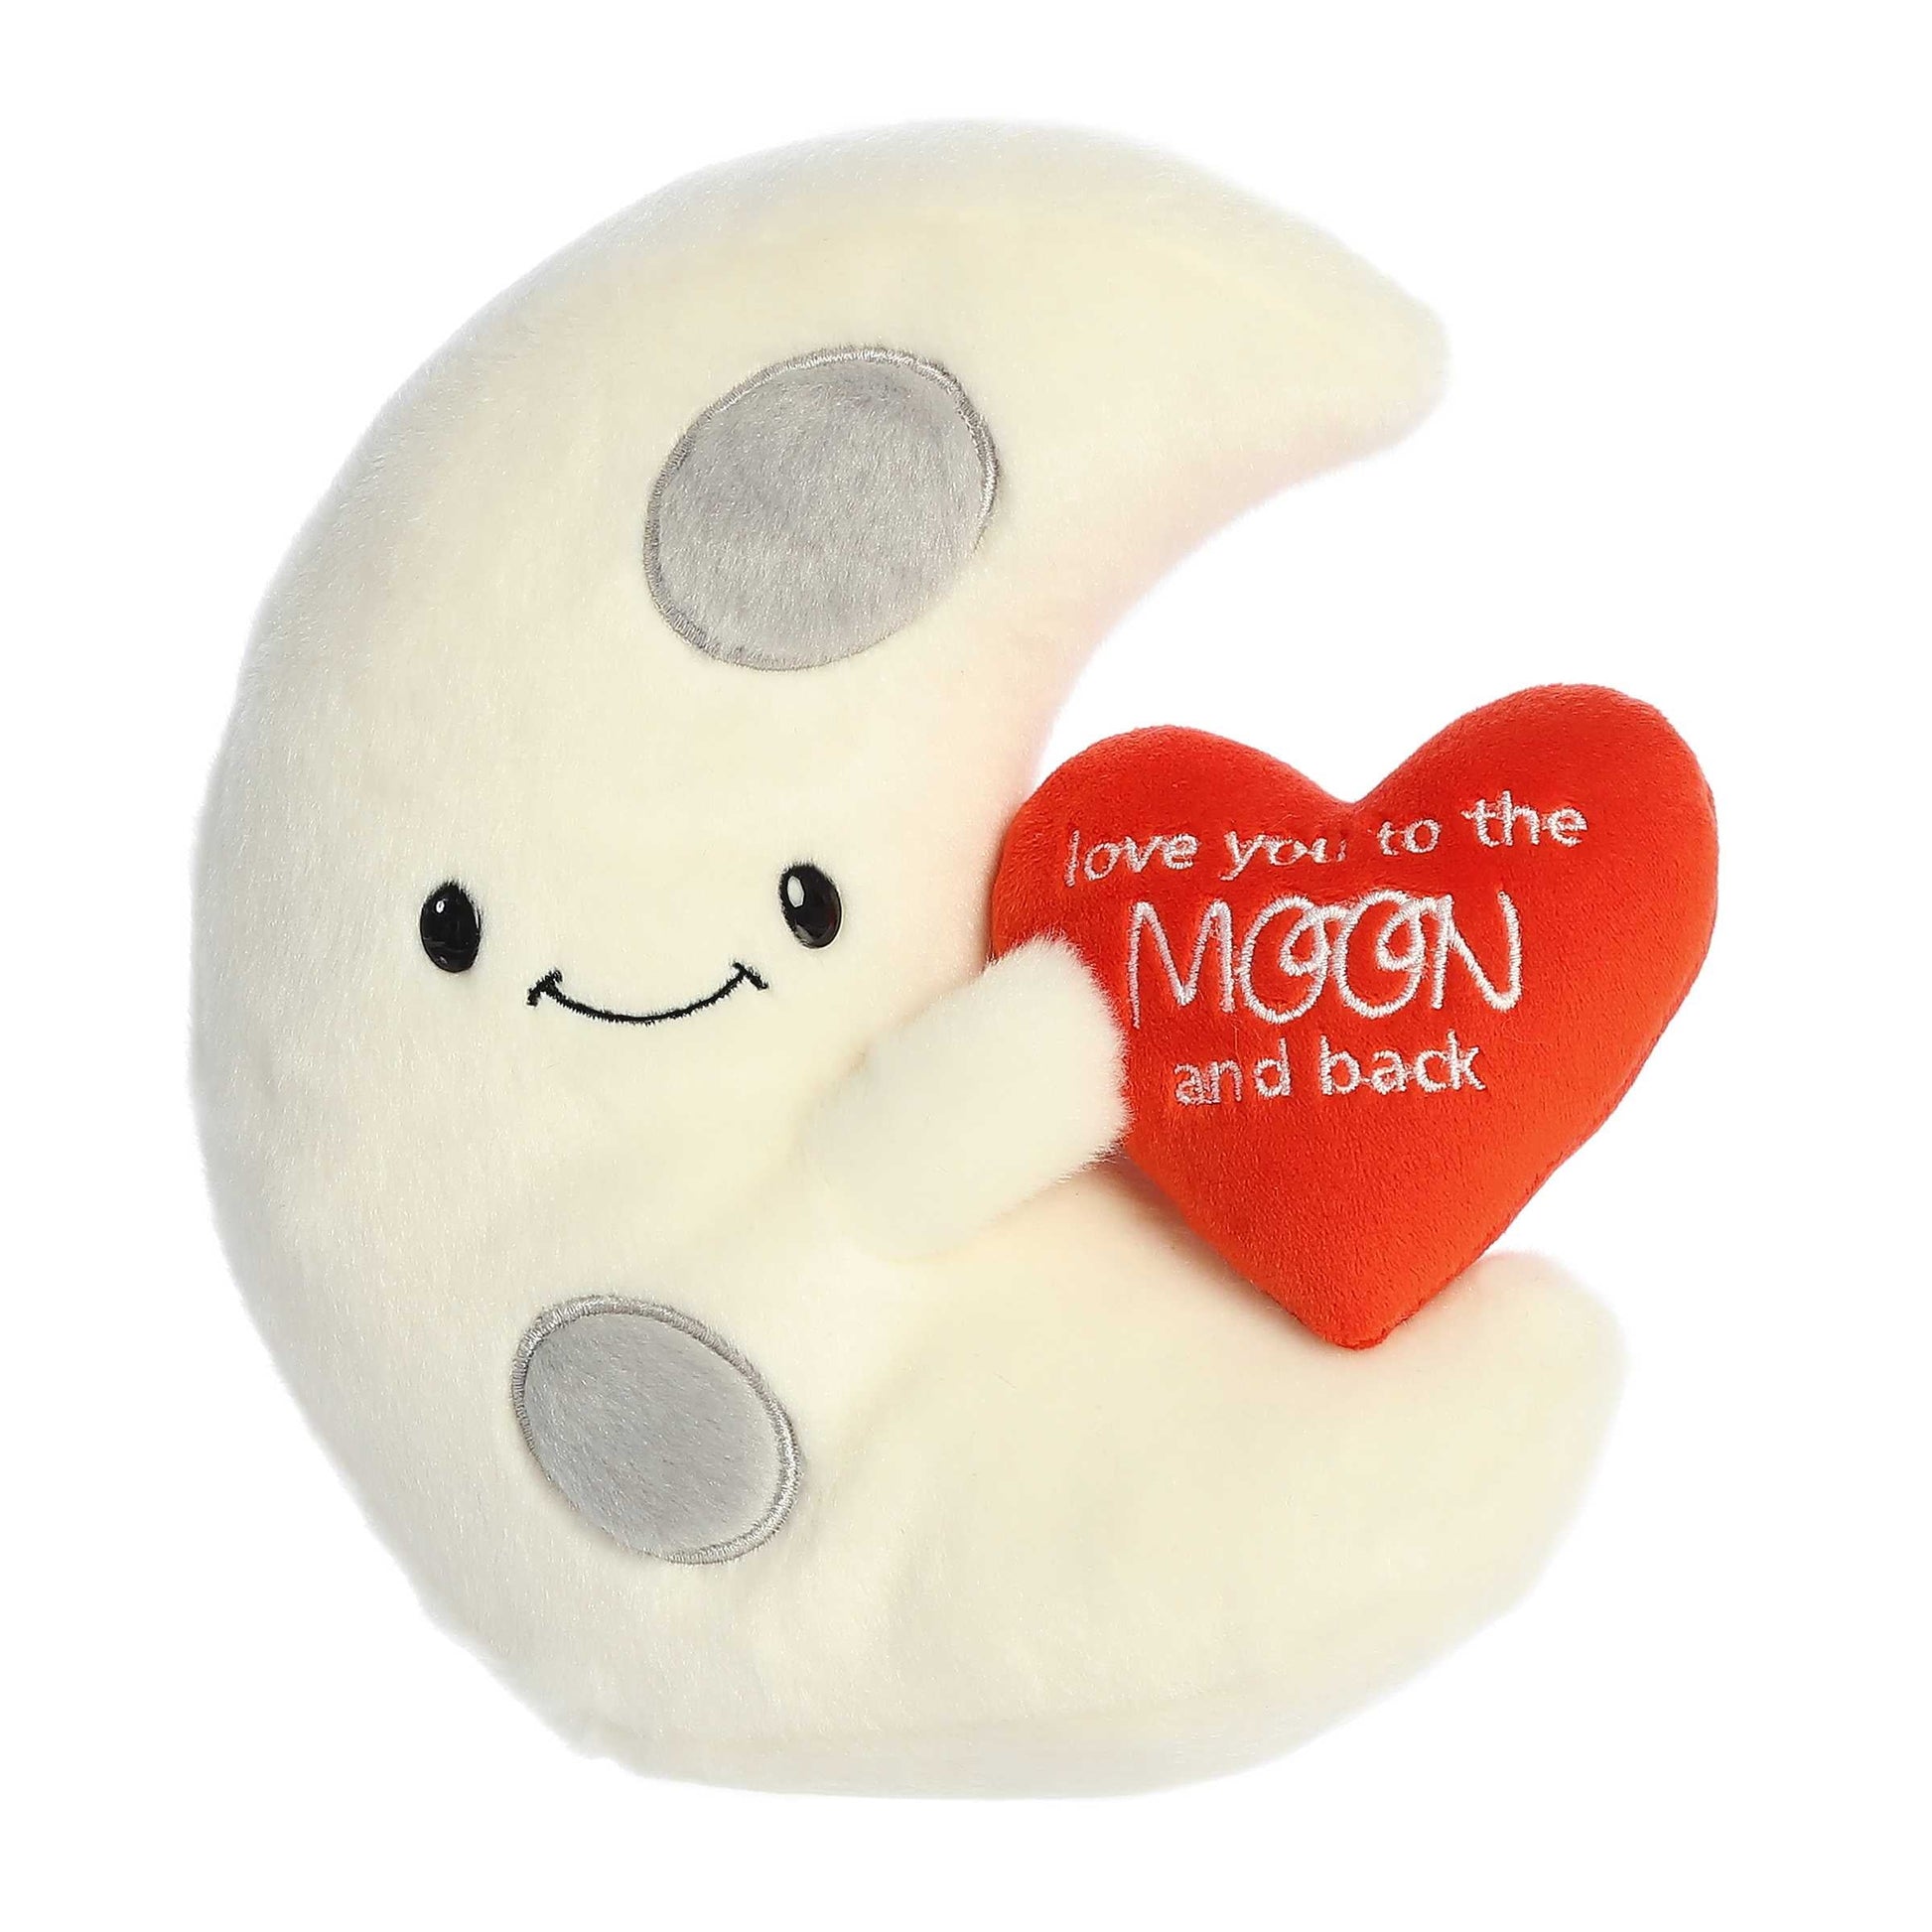 Love You To The Moon And Back Plush 9"